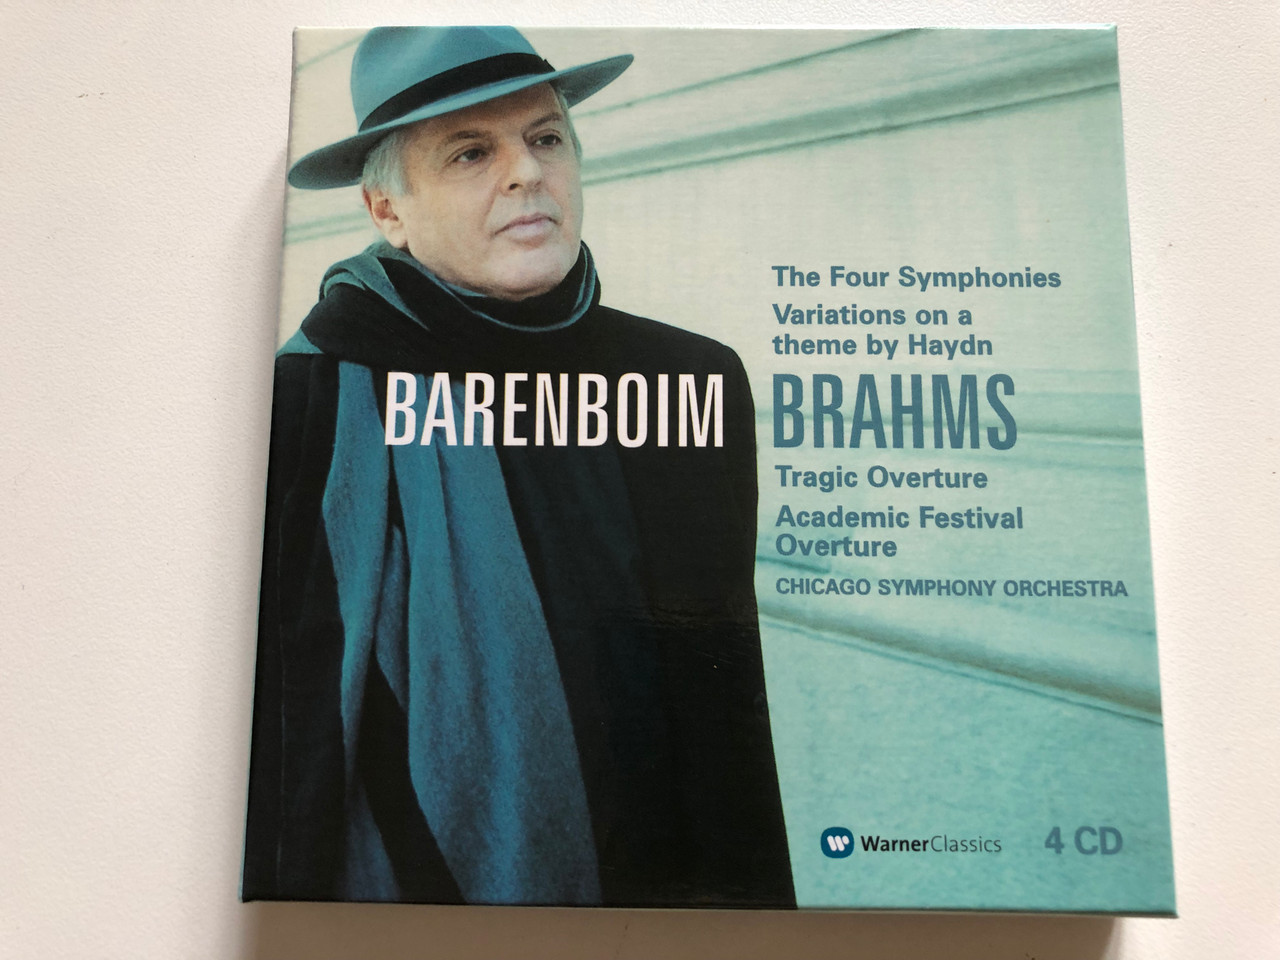 https://cdn10.bigcommerce.com/s-62bdpkt7pb/products/0/images/308371/Barenboim_-Brahms_The_Four_Symphonies_Variations_on_a_theme_by_Haydn_Tragic_Overture_Academic_Festival_Overture_-_Chicago_Symphony_Orchestra_Warner_Classics_4x_Audio_CD_2564_61892-2_1__37711.1699010400.1280.1280.JPG?c=2